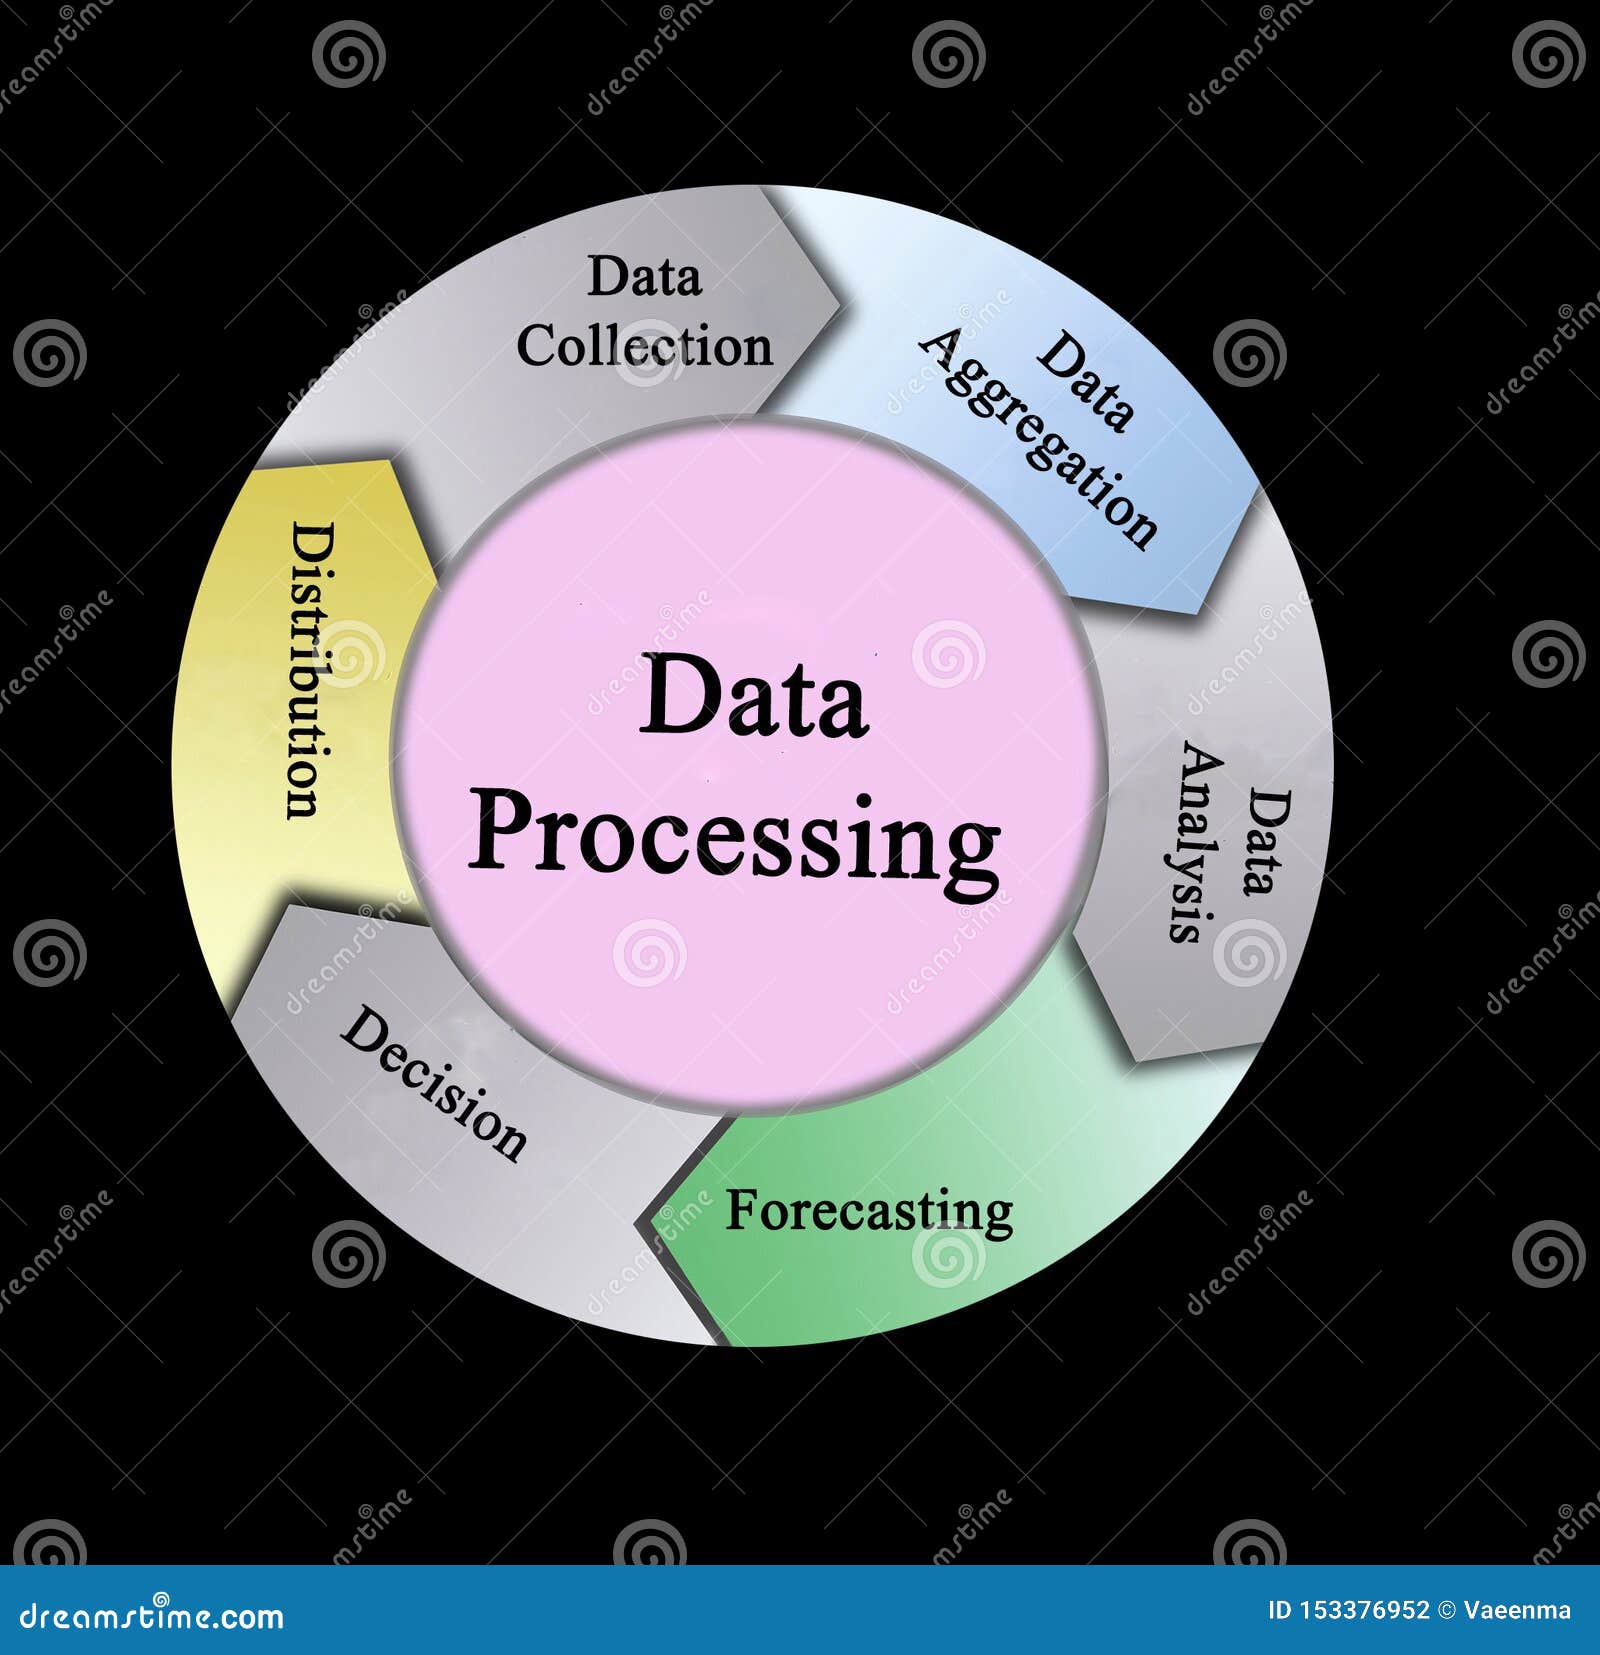 components of data processing